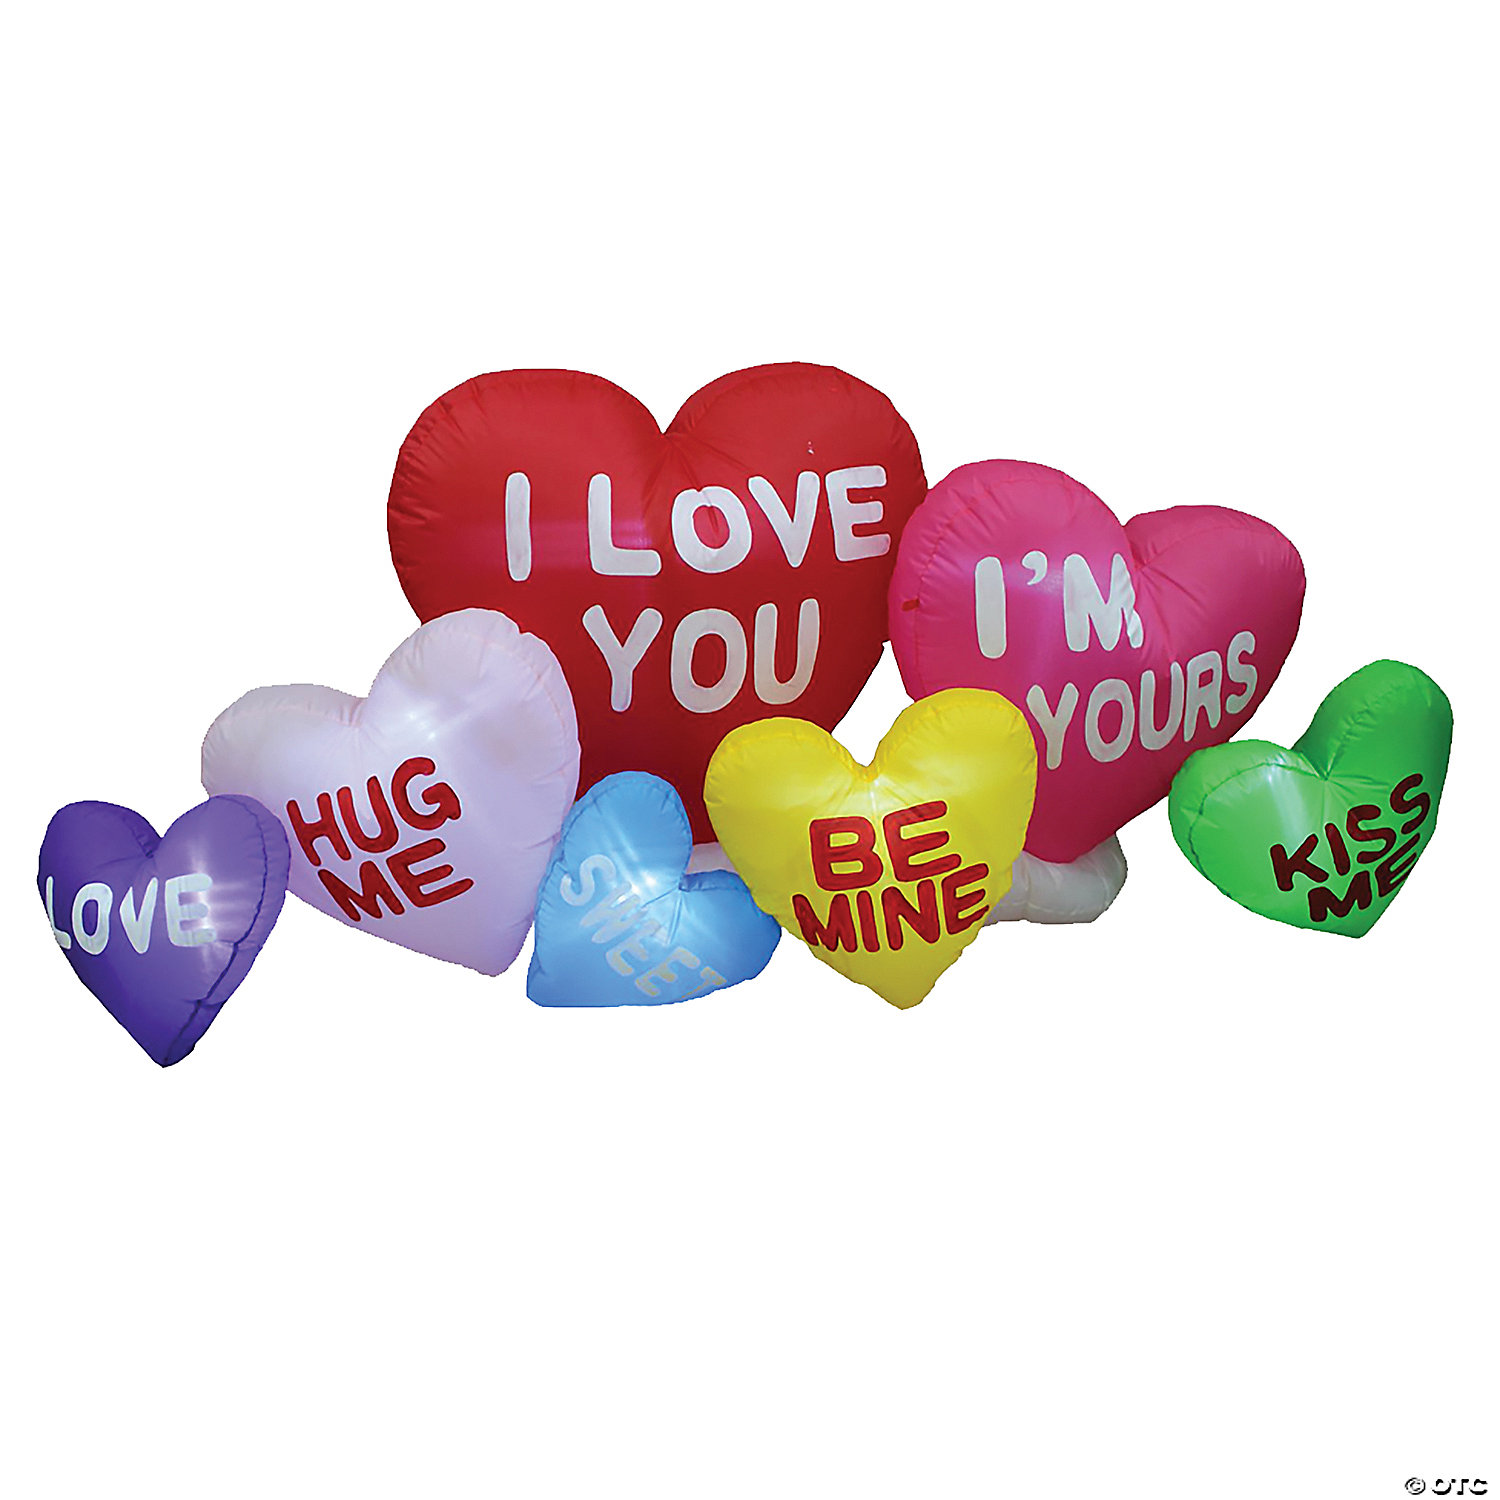 I LUV U HEARTS INFLATE 6.5 FT - VALENTINE'S DAY